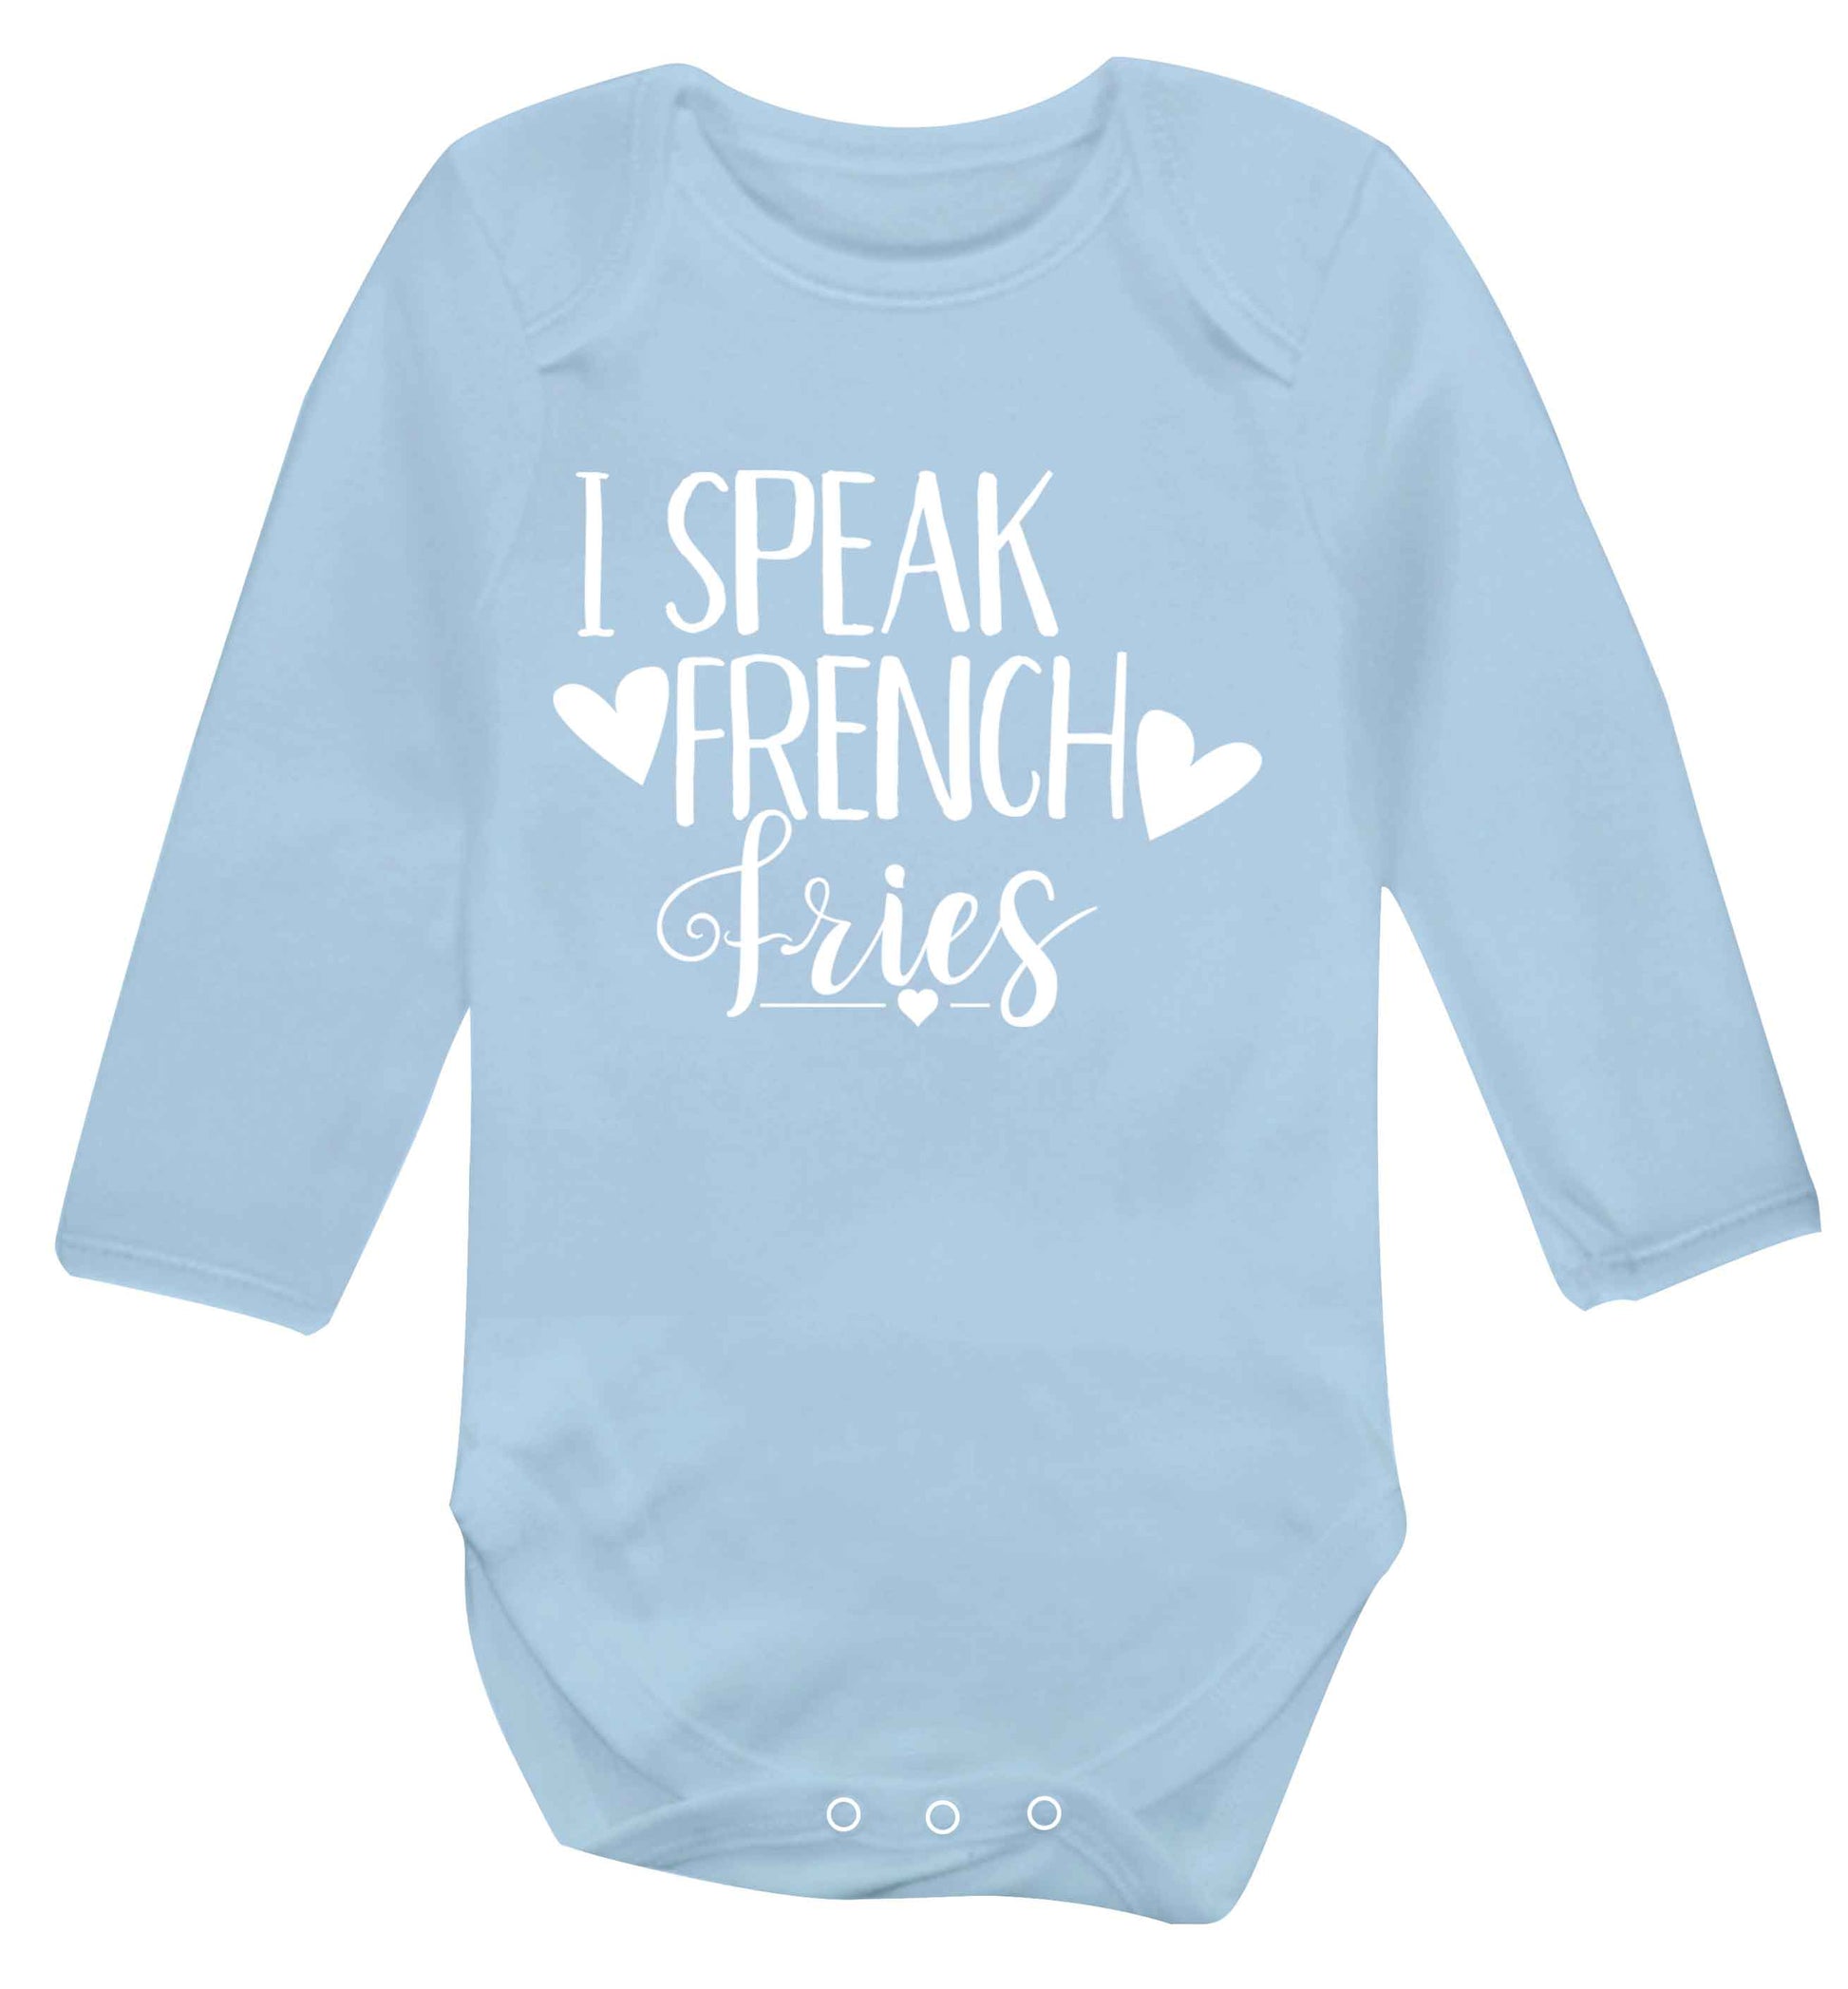 I speak French fries Baby Vest long sleeved pale blue 6-12 months